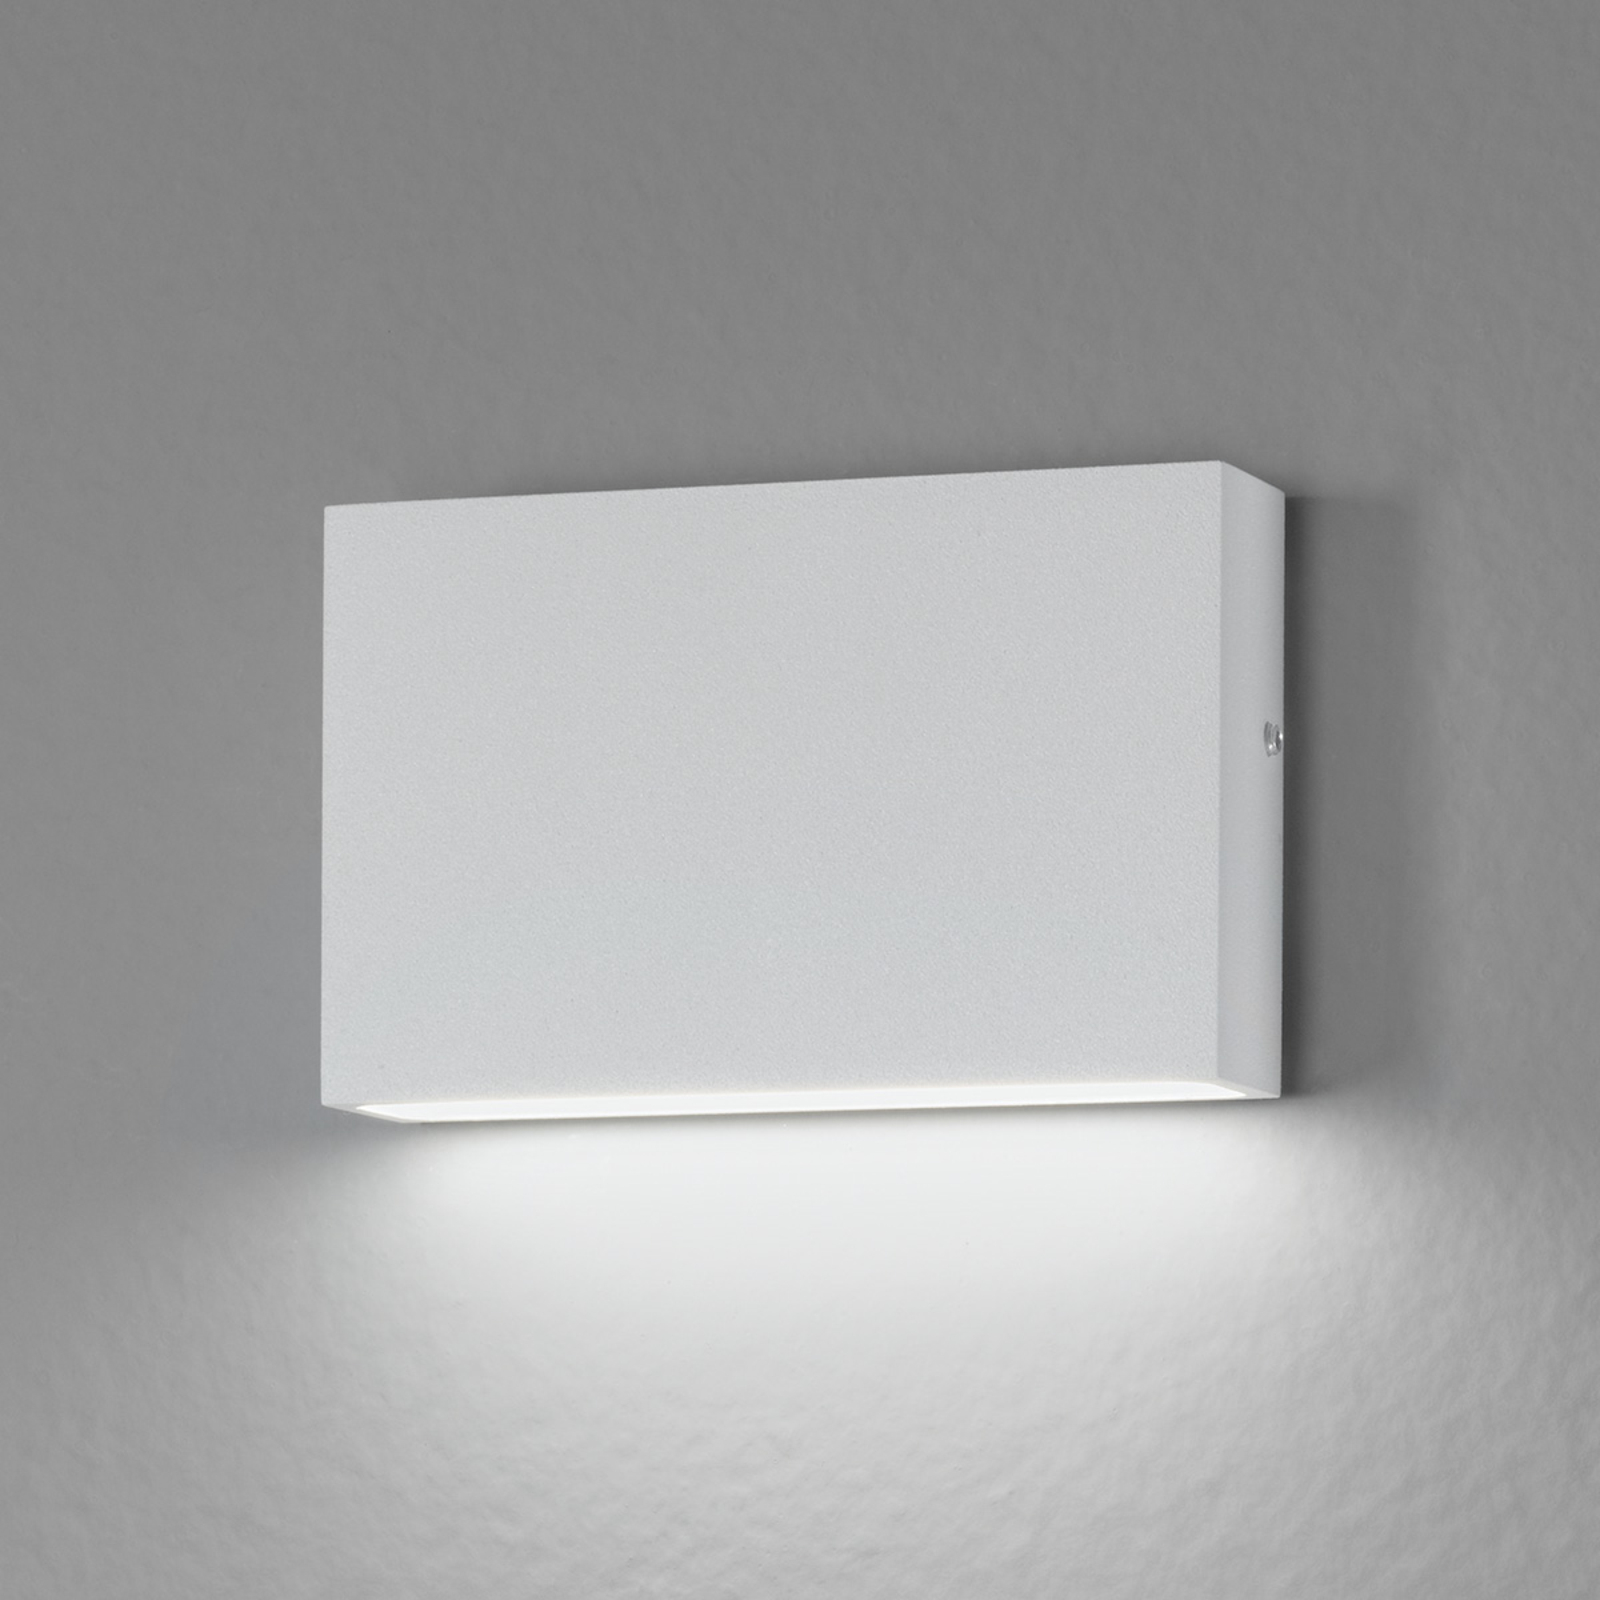 Flatbox LED wall light for indoor & outdoor usage